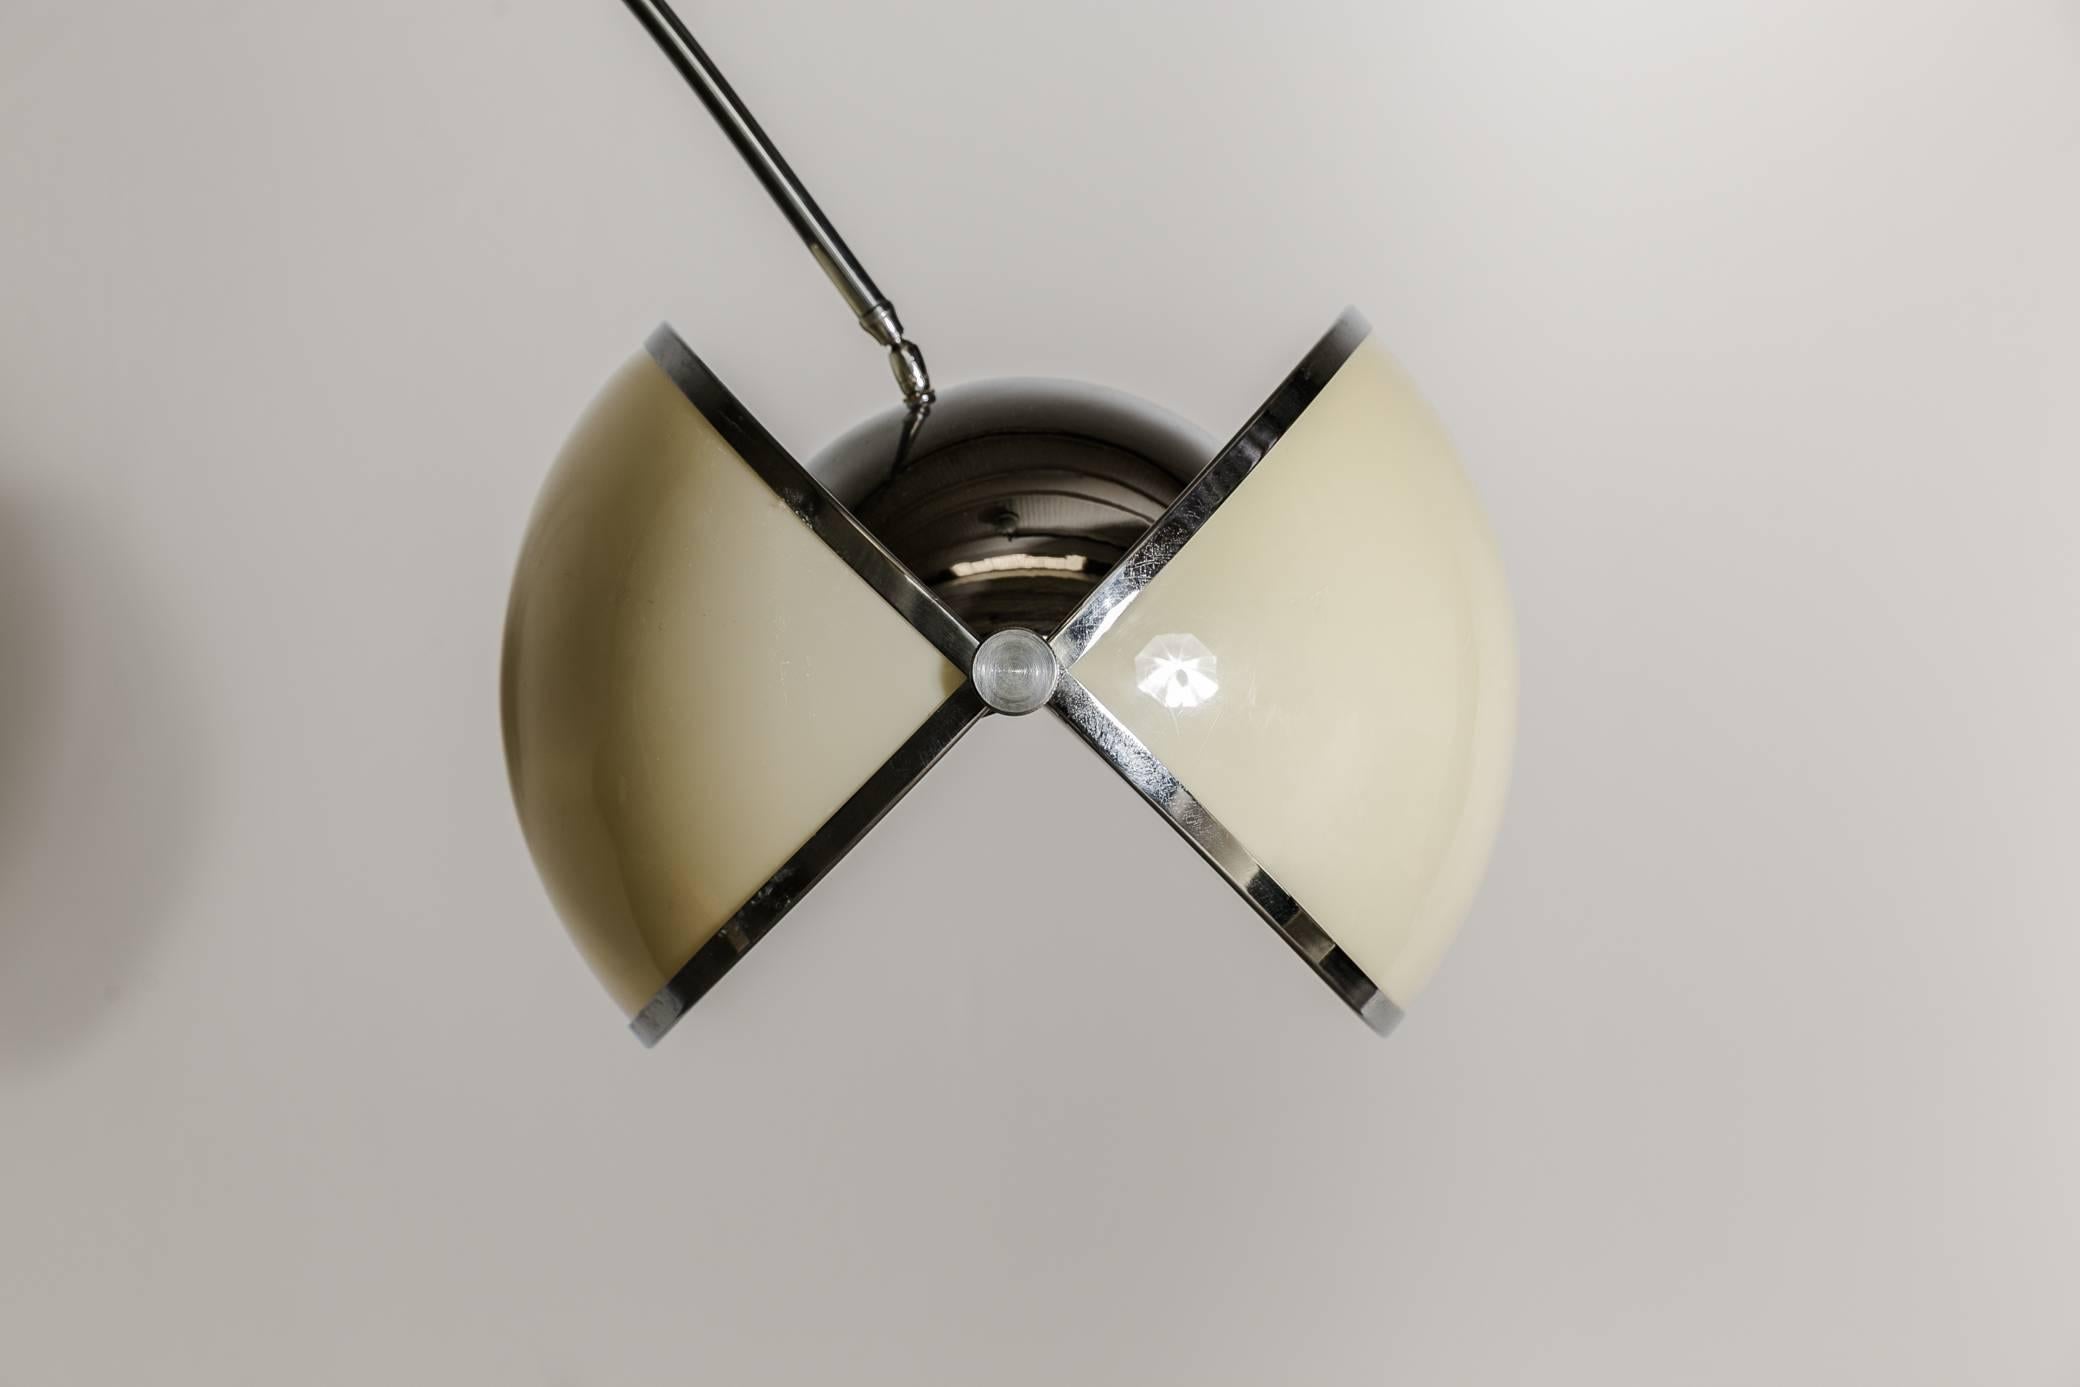 Italian Oolok/Molok Arco Lamp In the style of  Superstudio, 1968, Italy